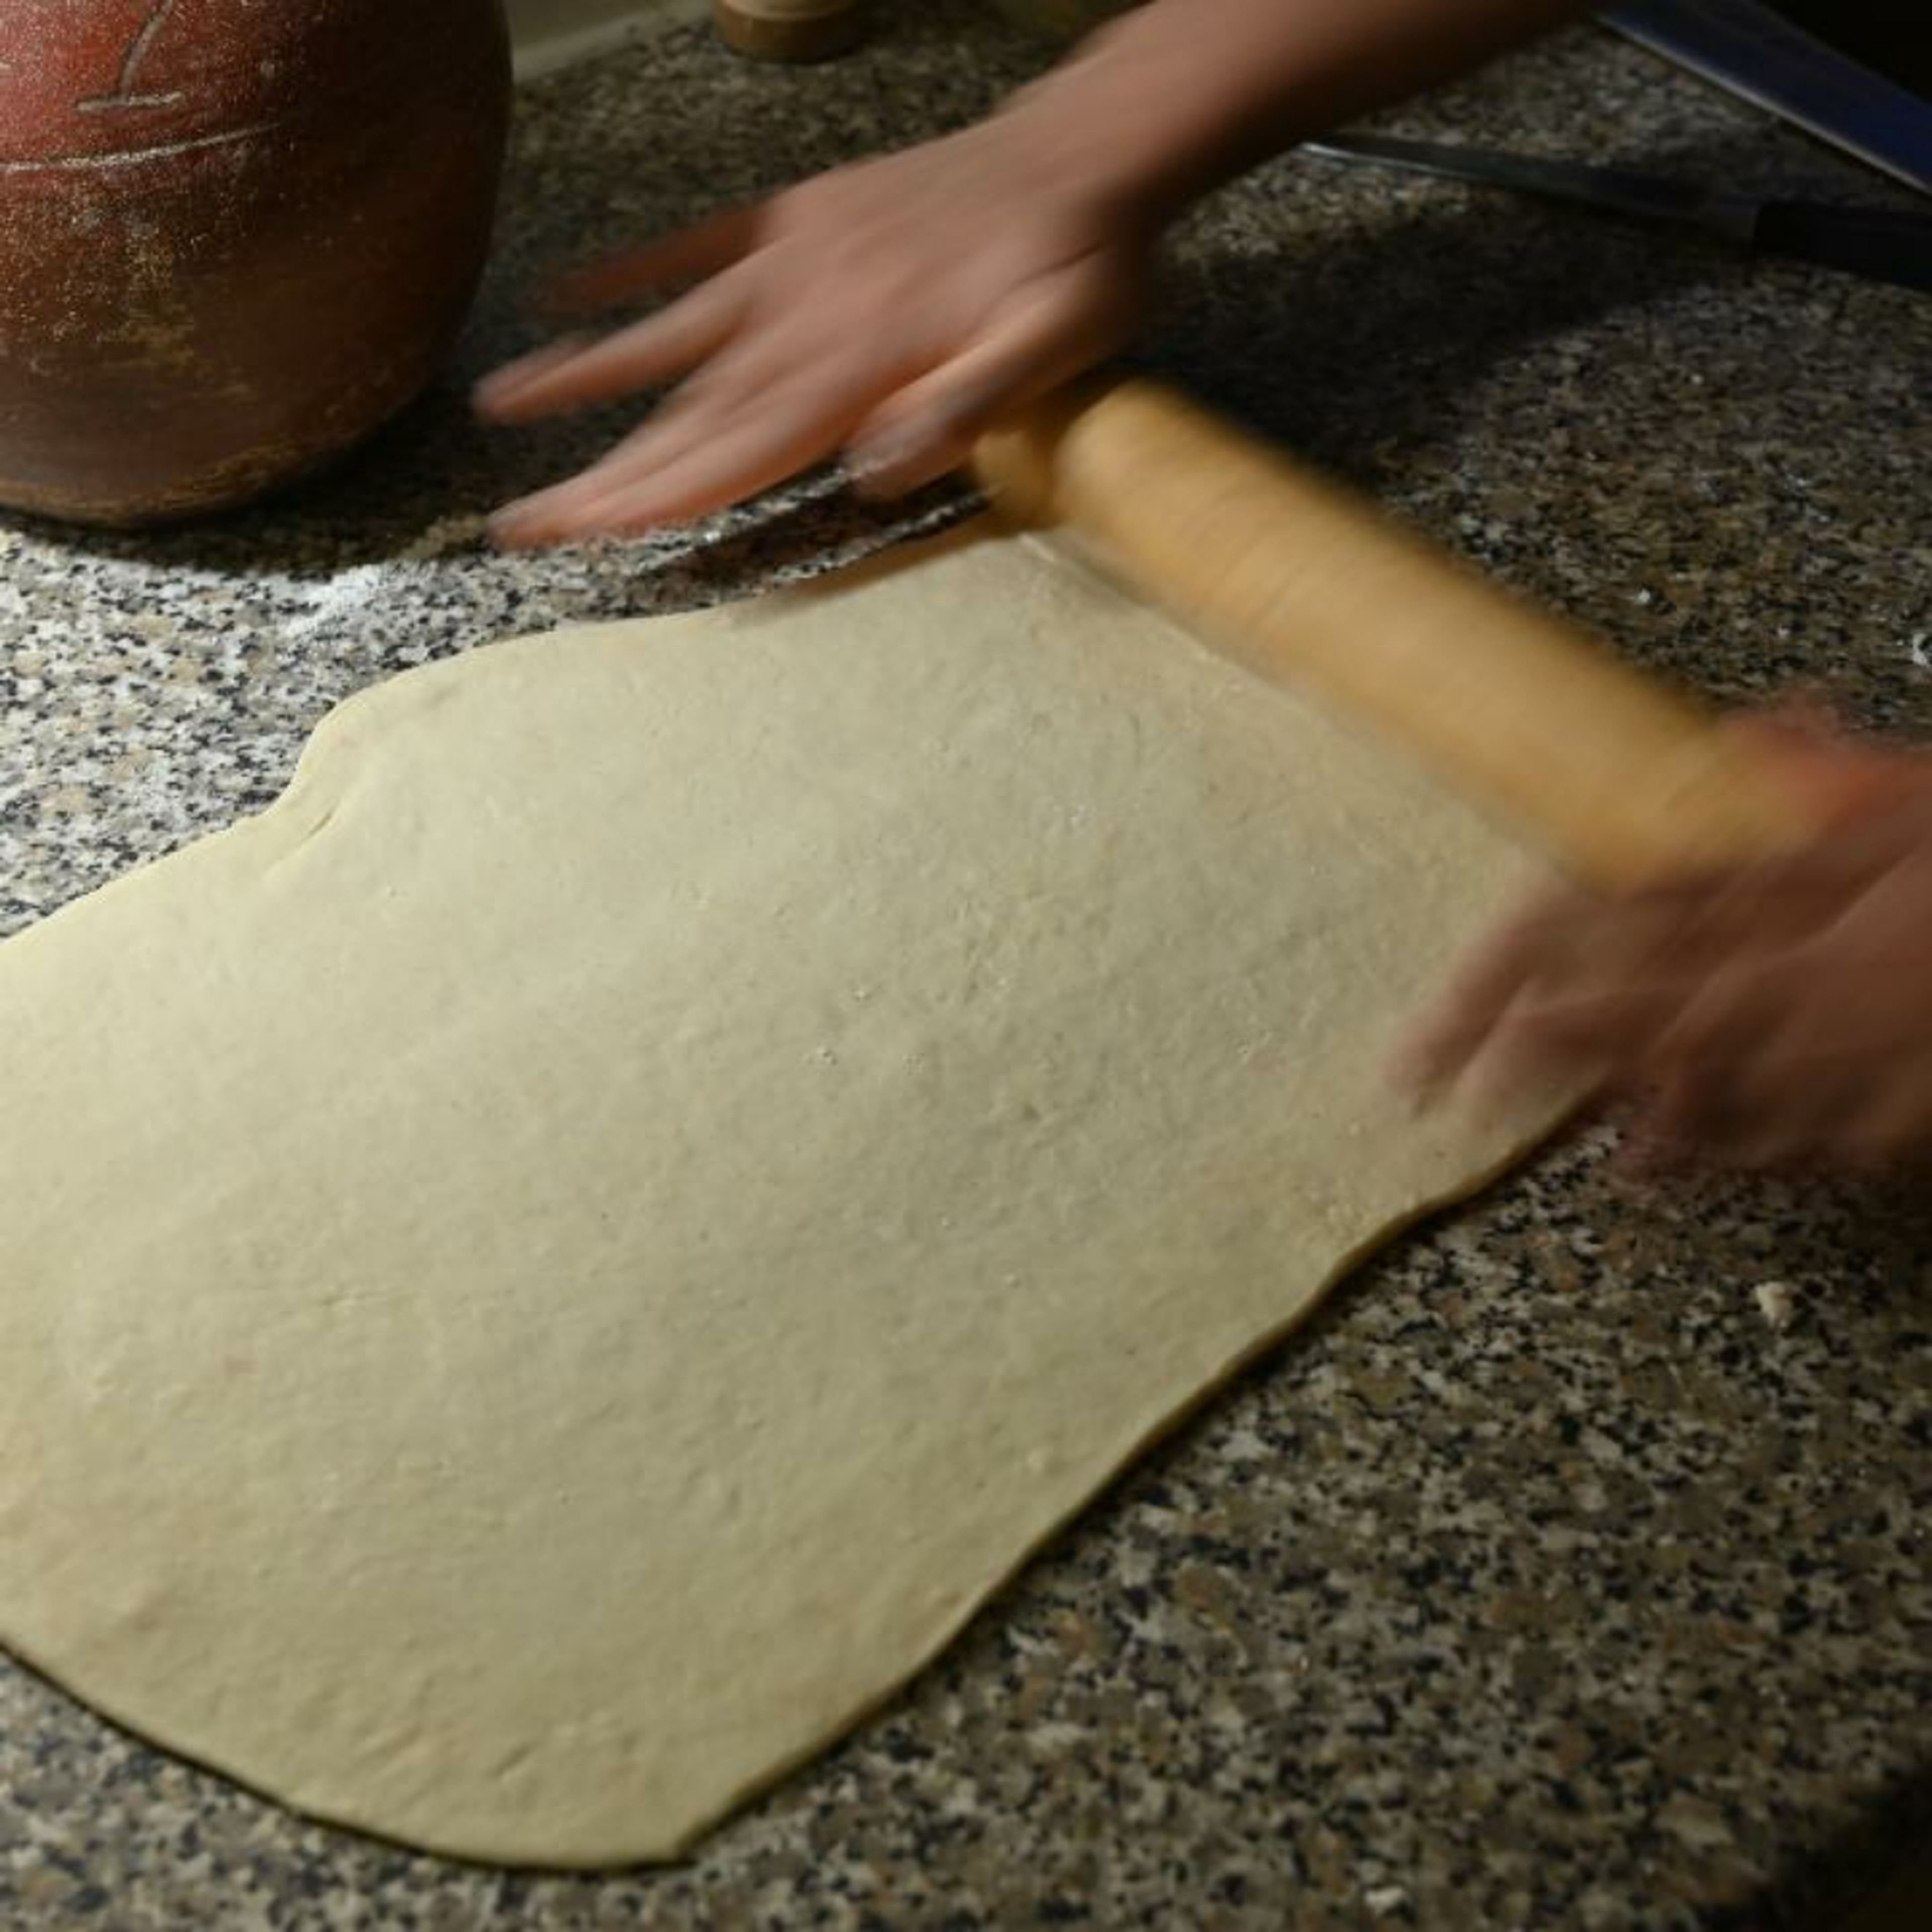 Knead the dough and roll it out to a rectangular shape (about 1 inch thickness).